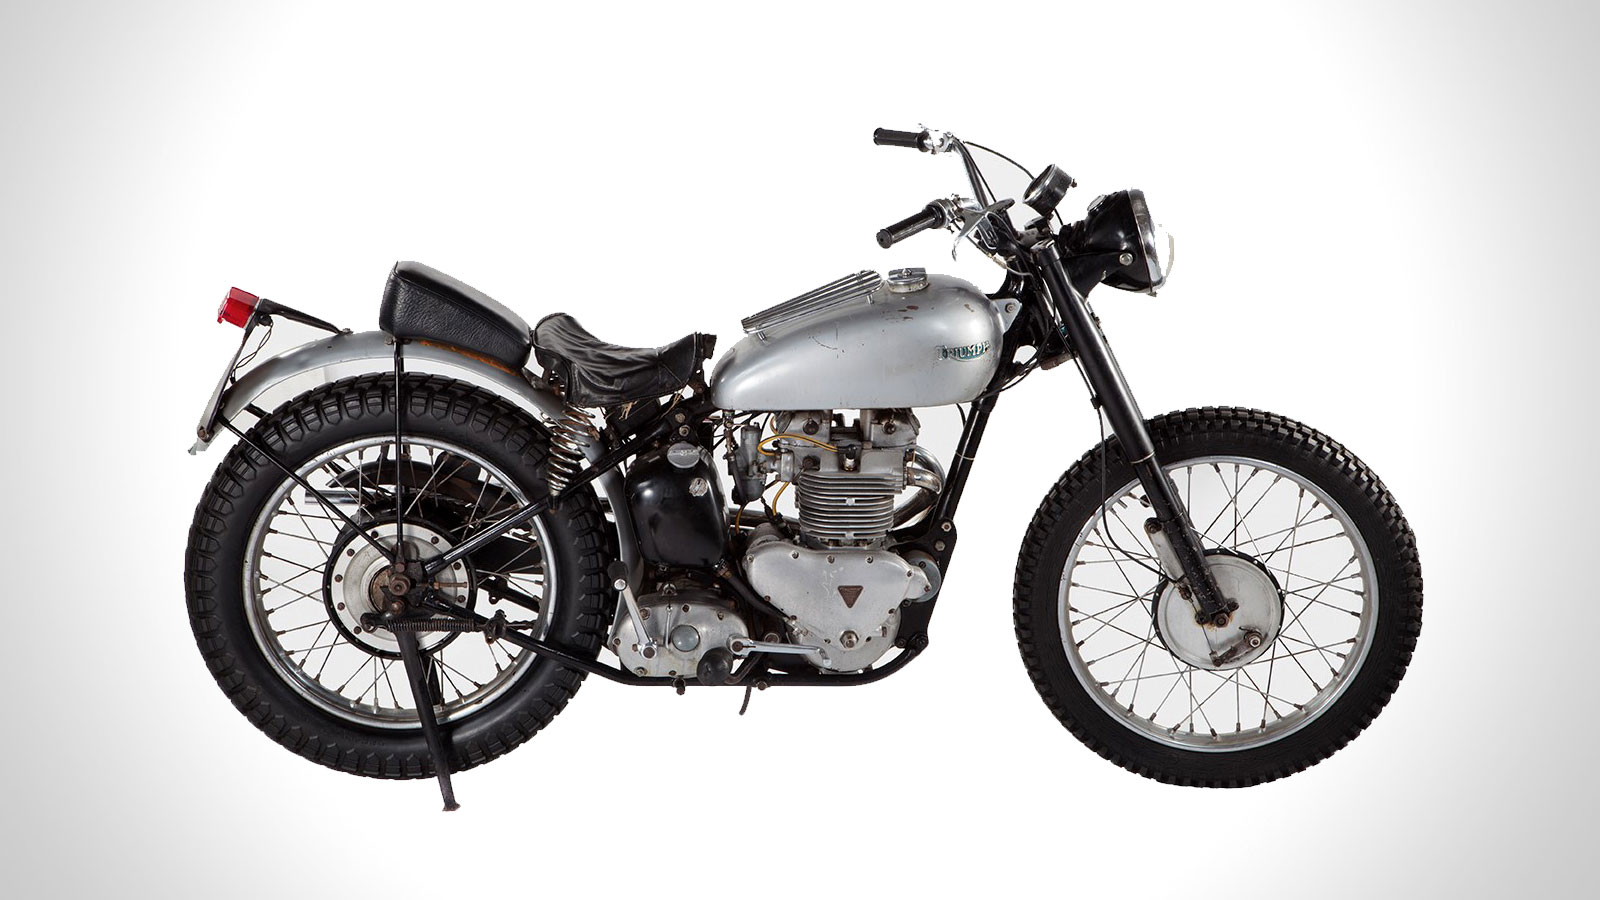 FONZIE'S HAPPY DAYS 1949 TRIUMPH MOTORCYCLE IS UP FOR AUCTION